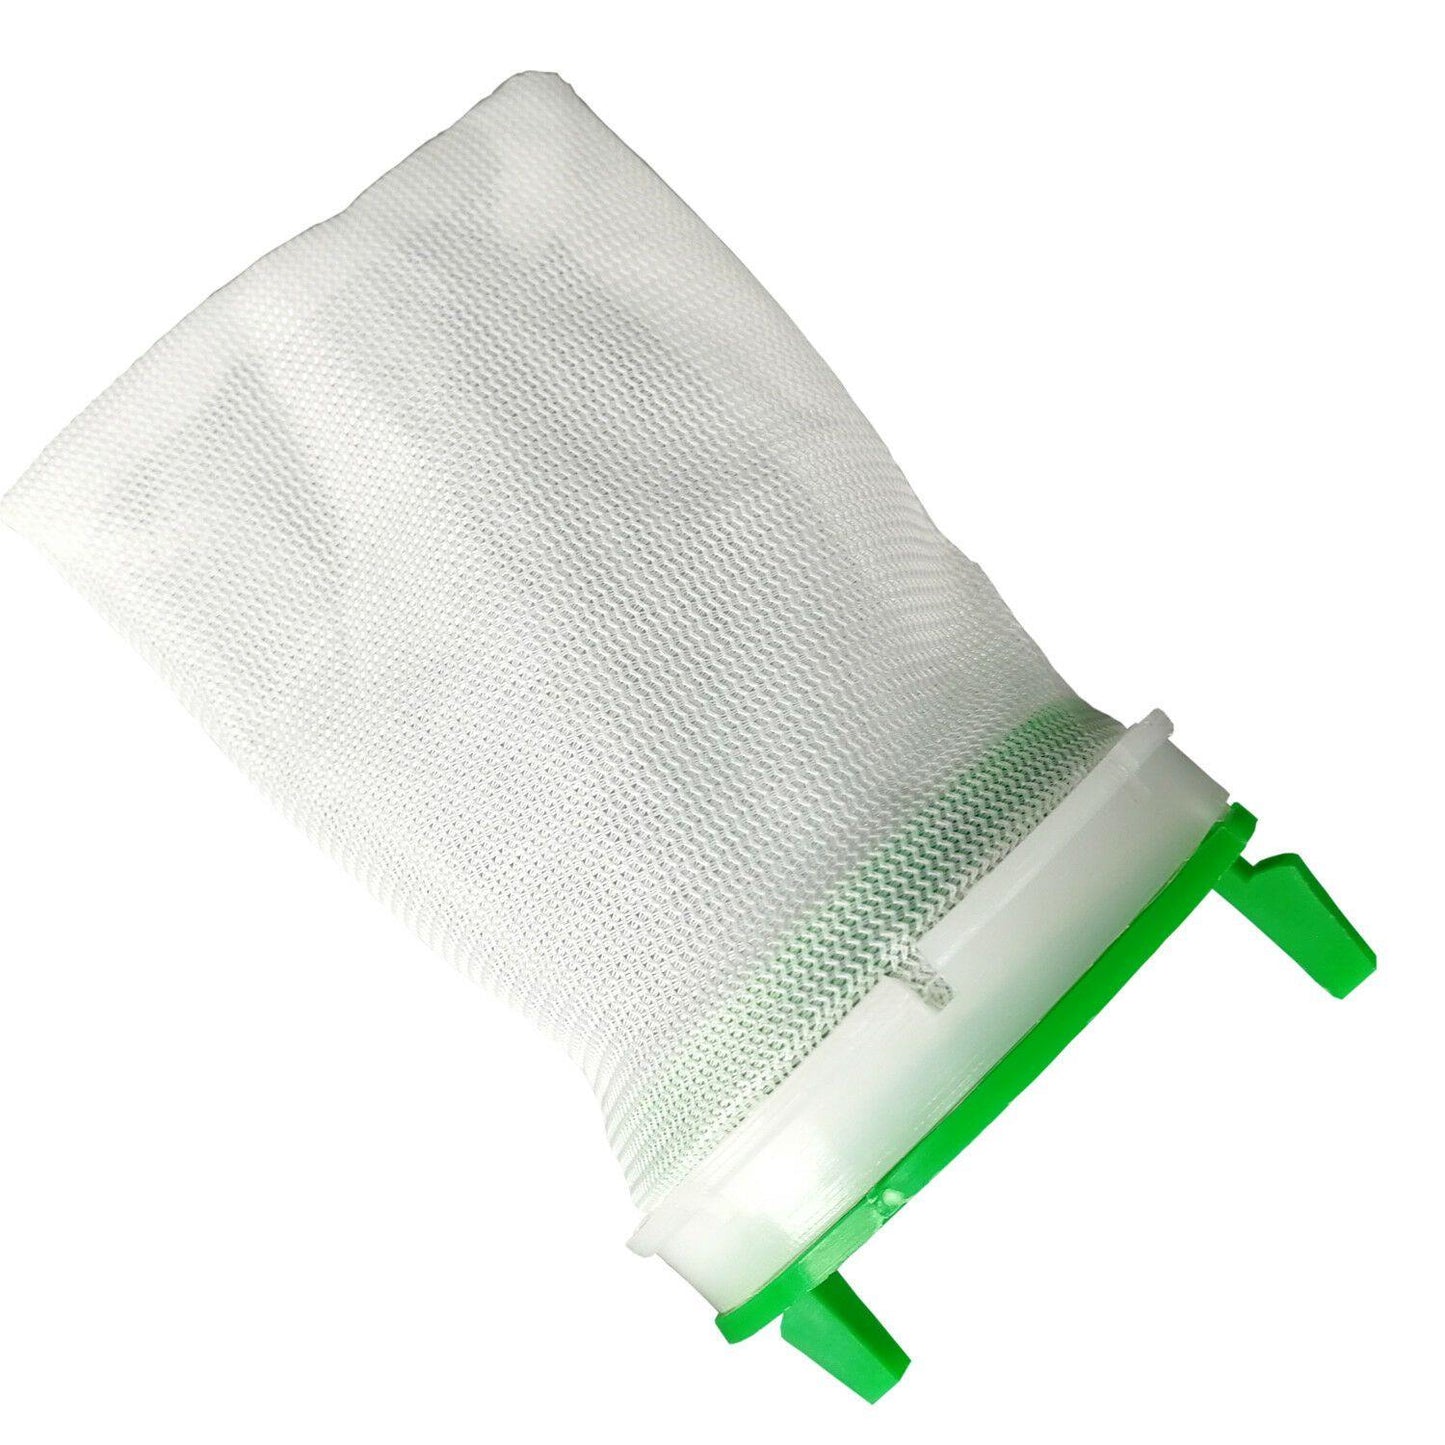 4X Washing Machine Lint Filter Bag For Simpson SWT604 SWT554 SWT9542 SWT8542 Sparesbarn